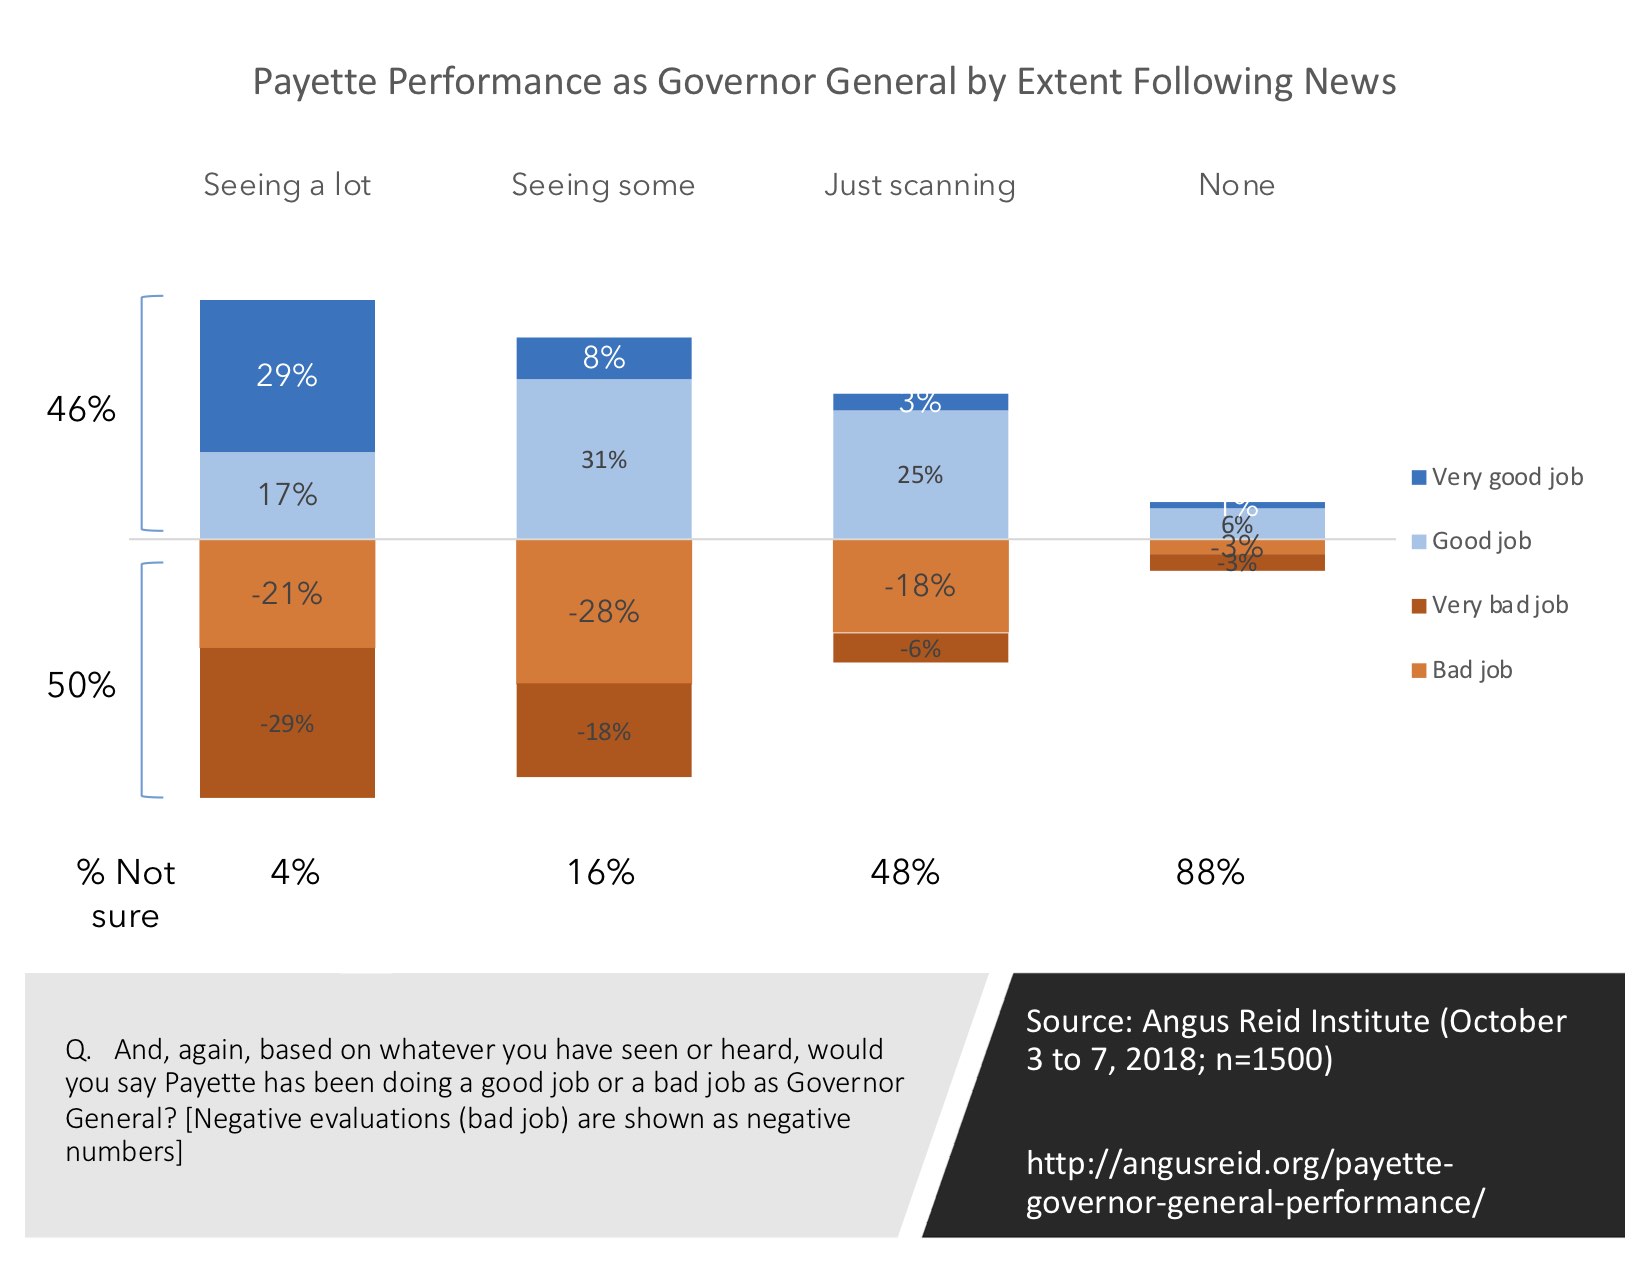 Perception of GG by News Attention